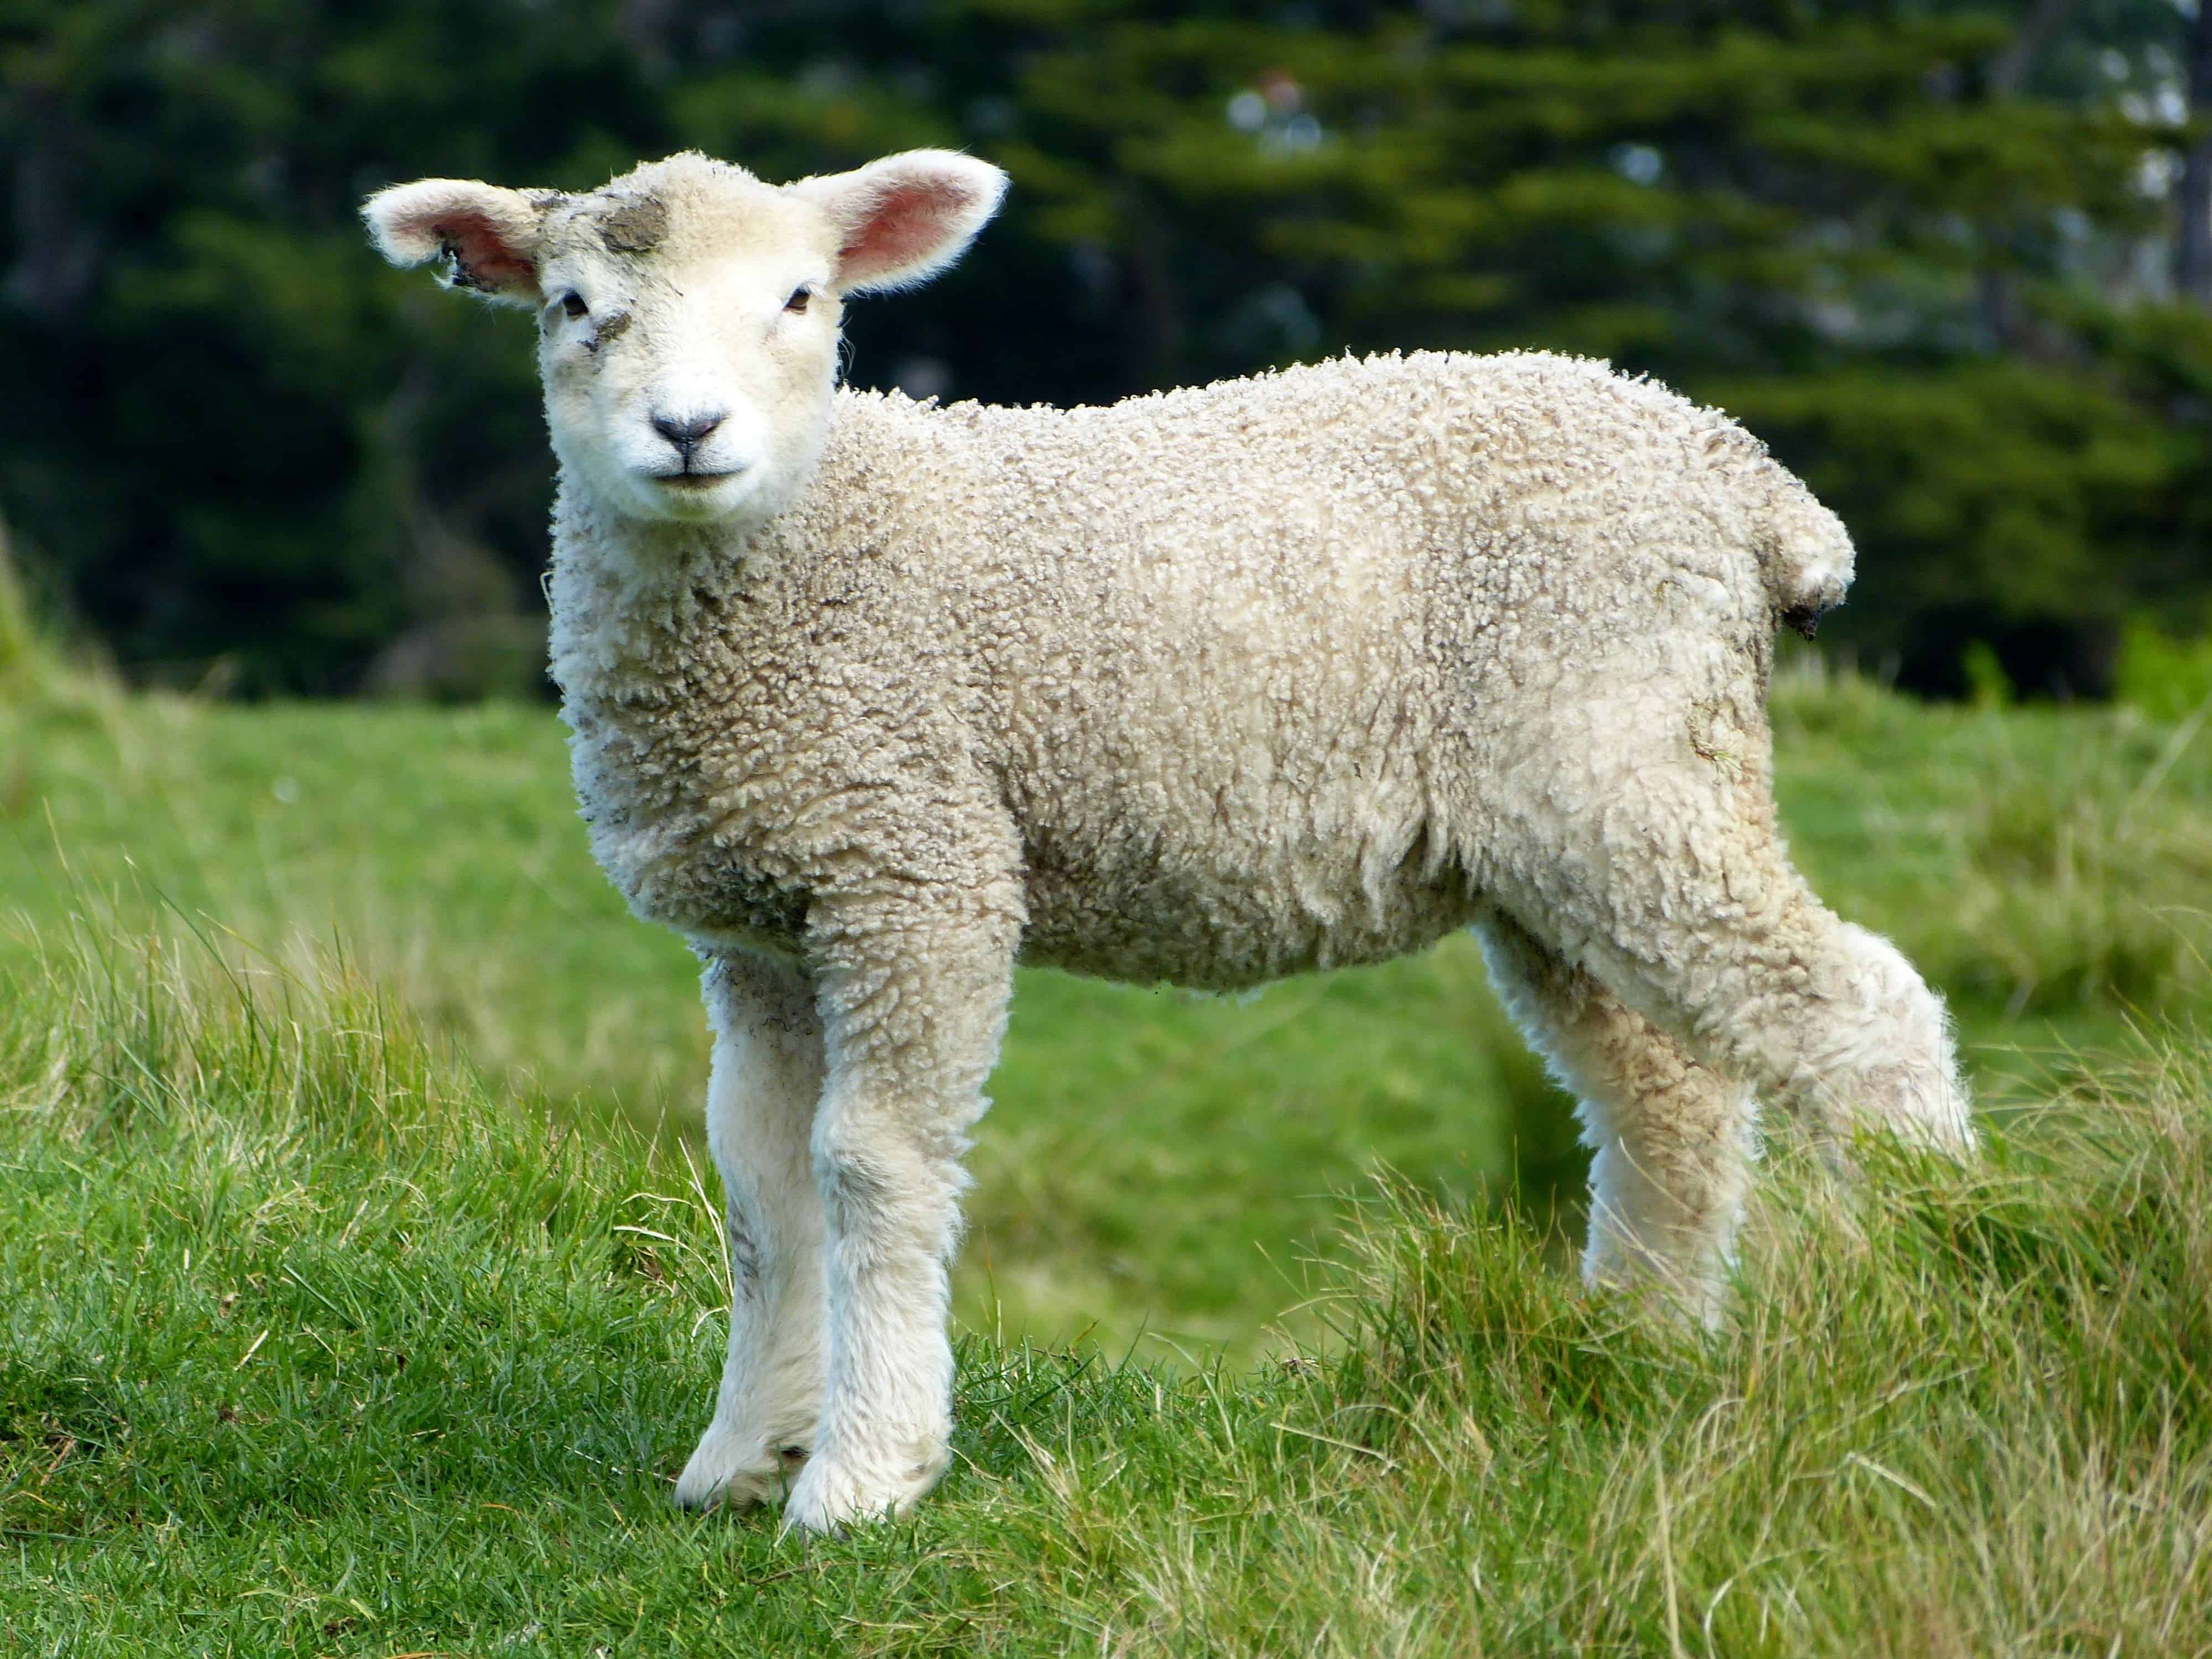 Sheep can be trained to recognise human faces from photographic portraits – and can even identify the picture of their handler without prior training.